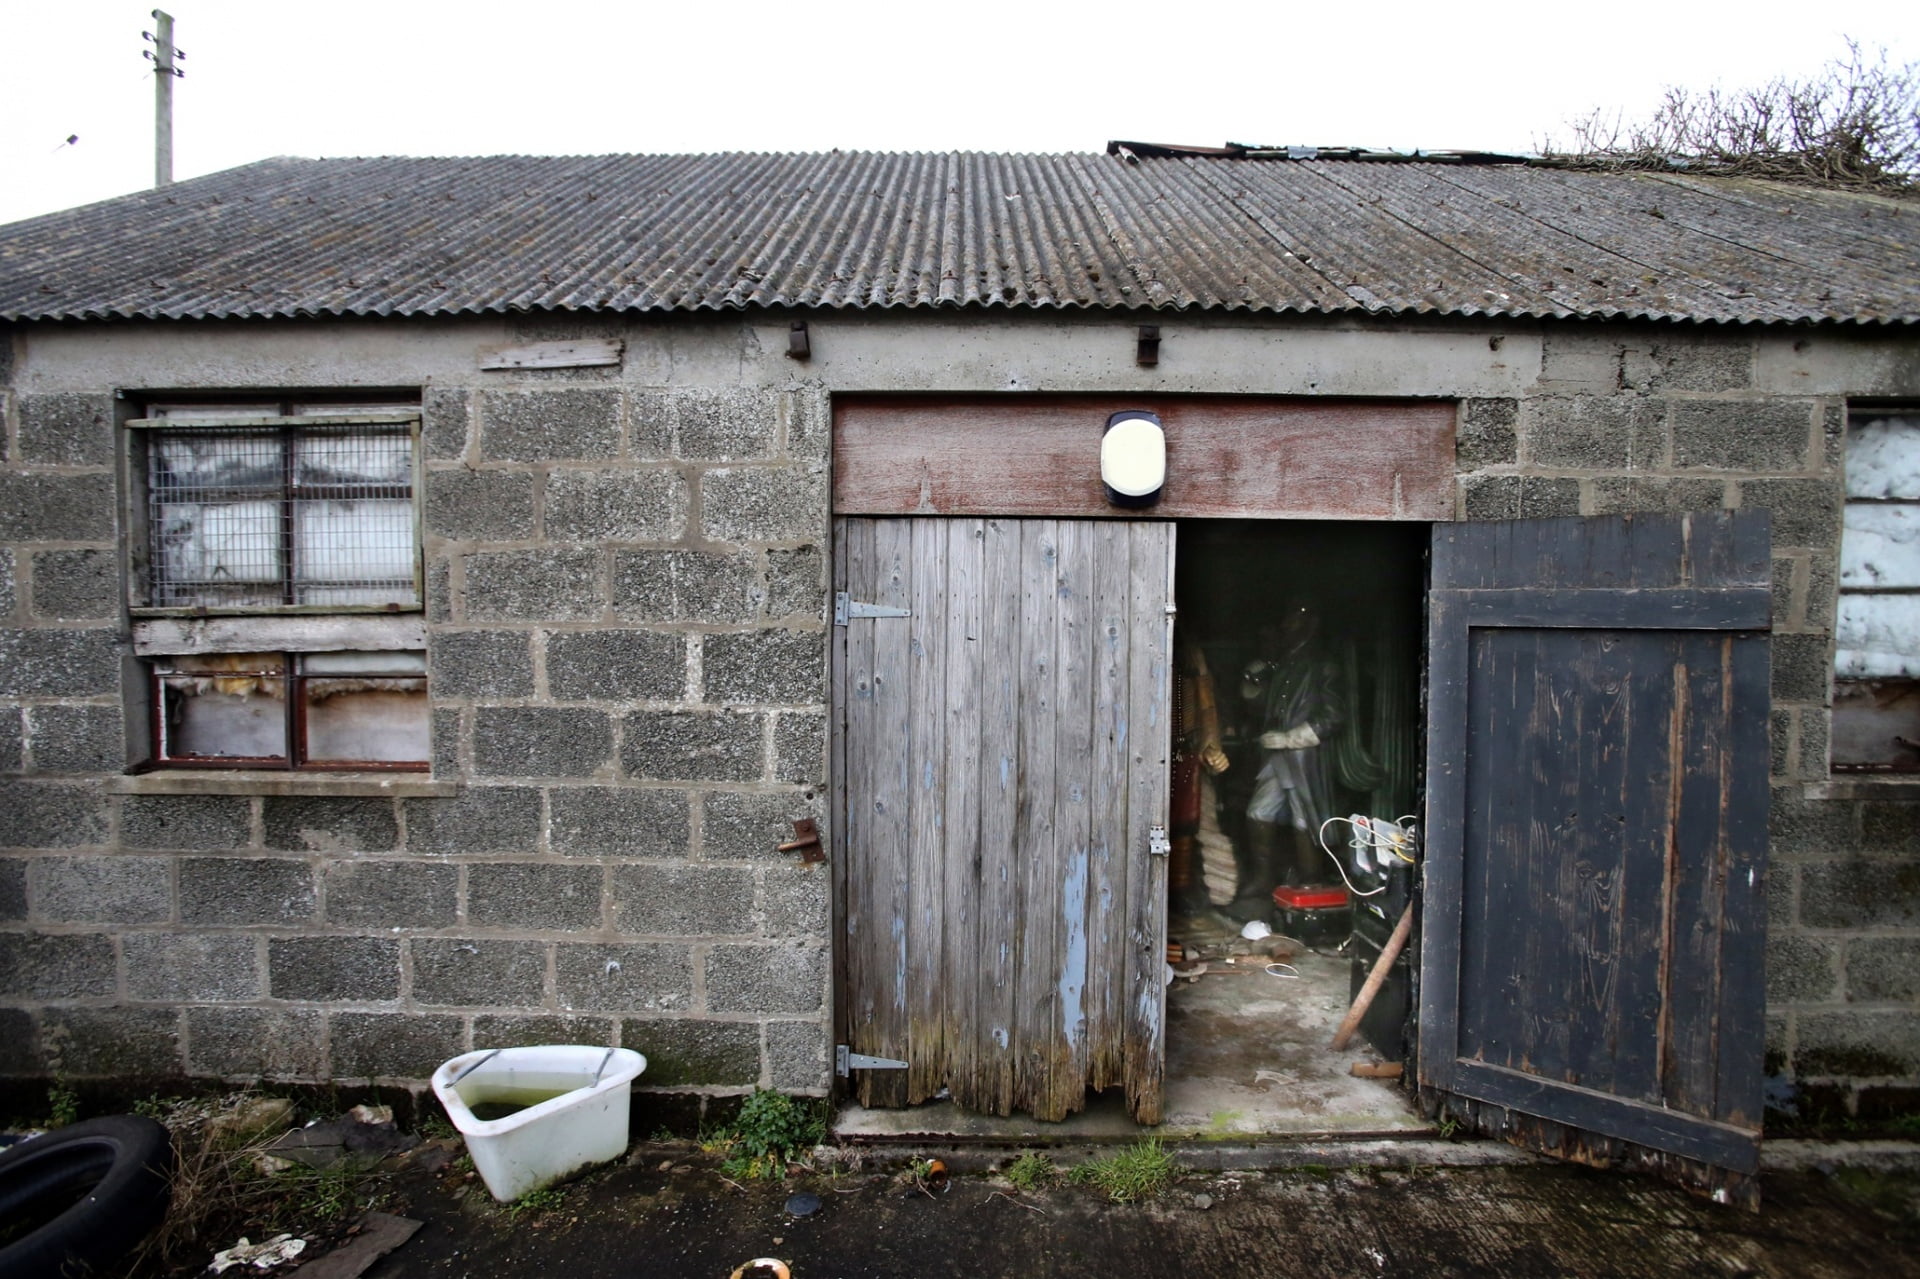 The old barn in Derrymacash, County Armagh, where the shooting took place.